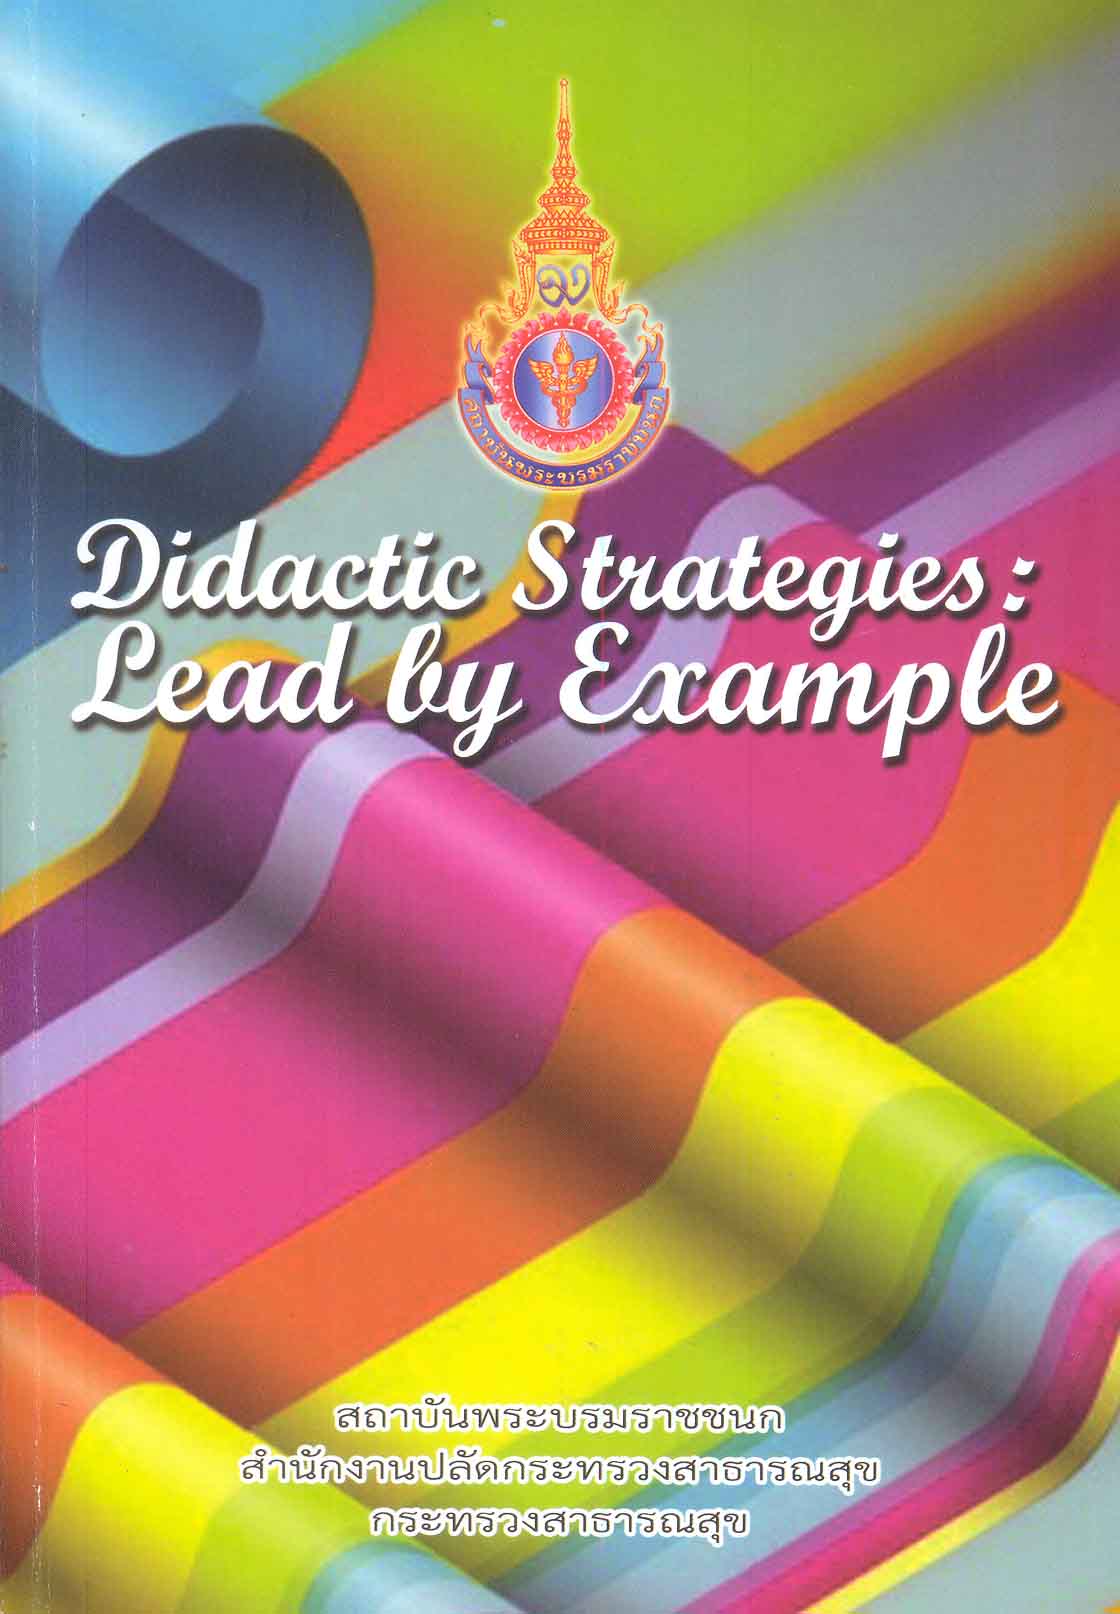 Didactic strategies : lead by example